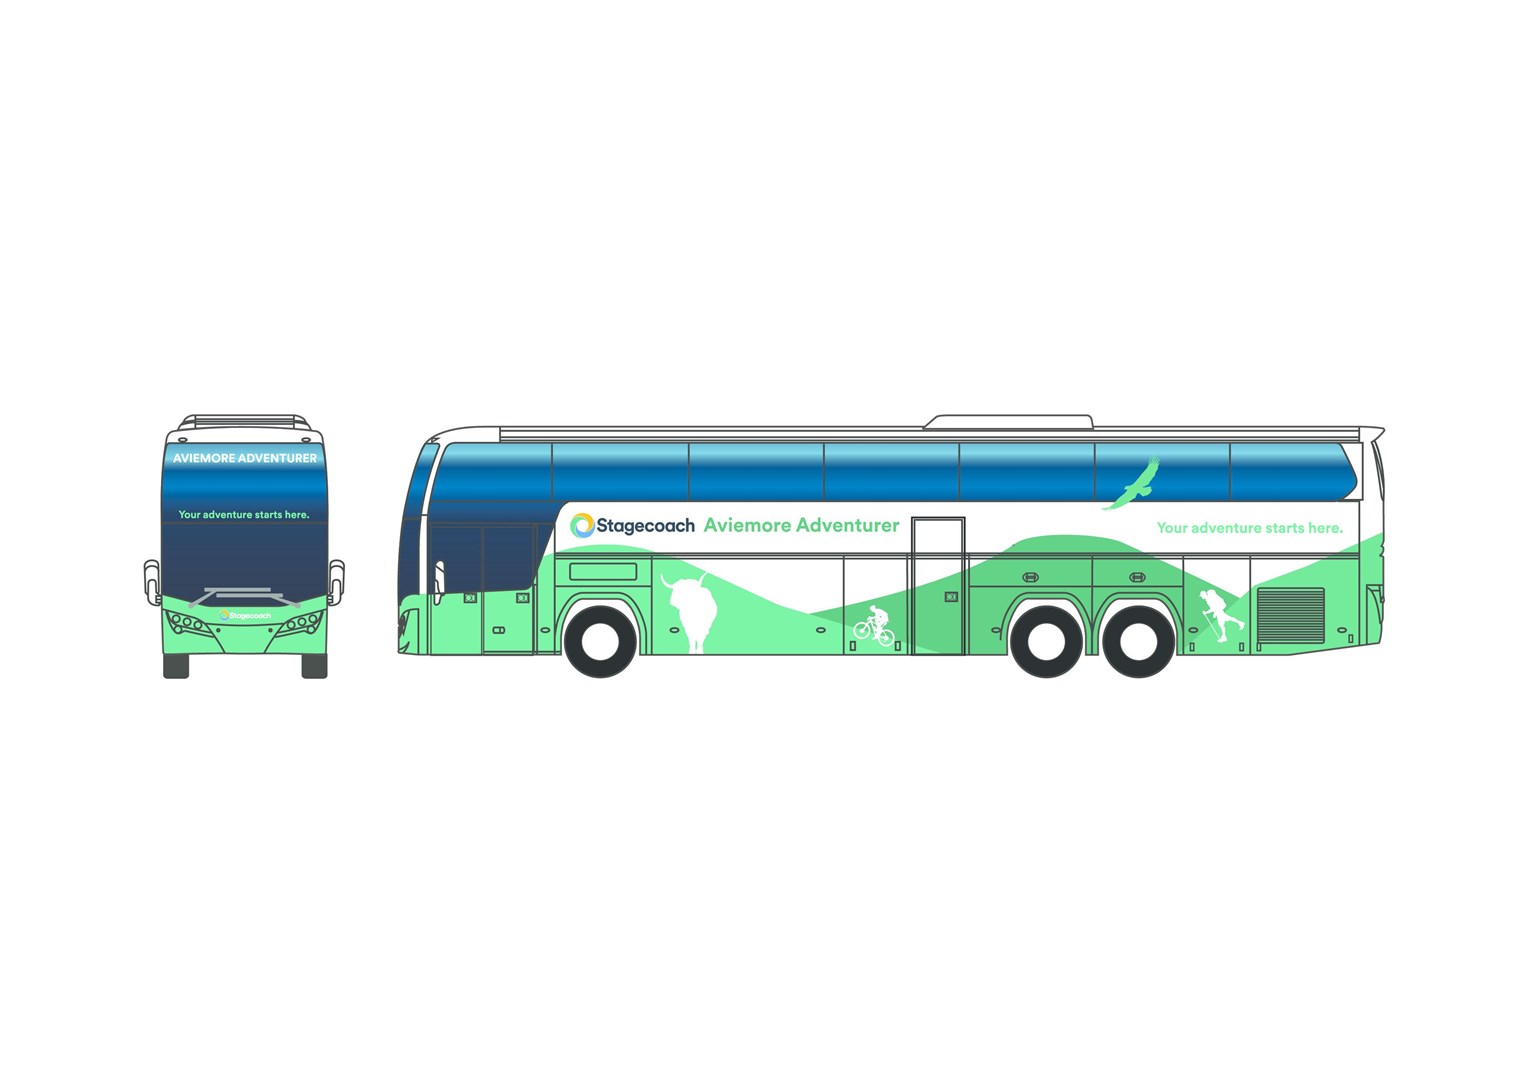 DESIGNS ON TOURISM: The new Stagecoach bus Aviemore Adventurer's livery.